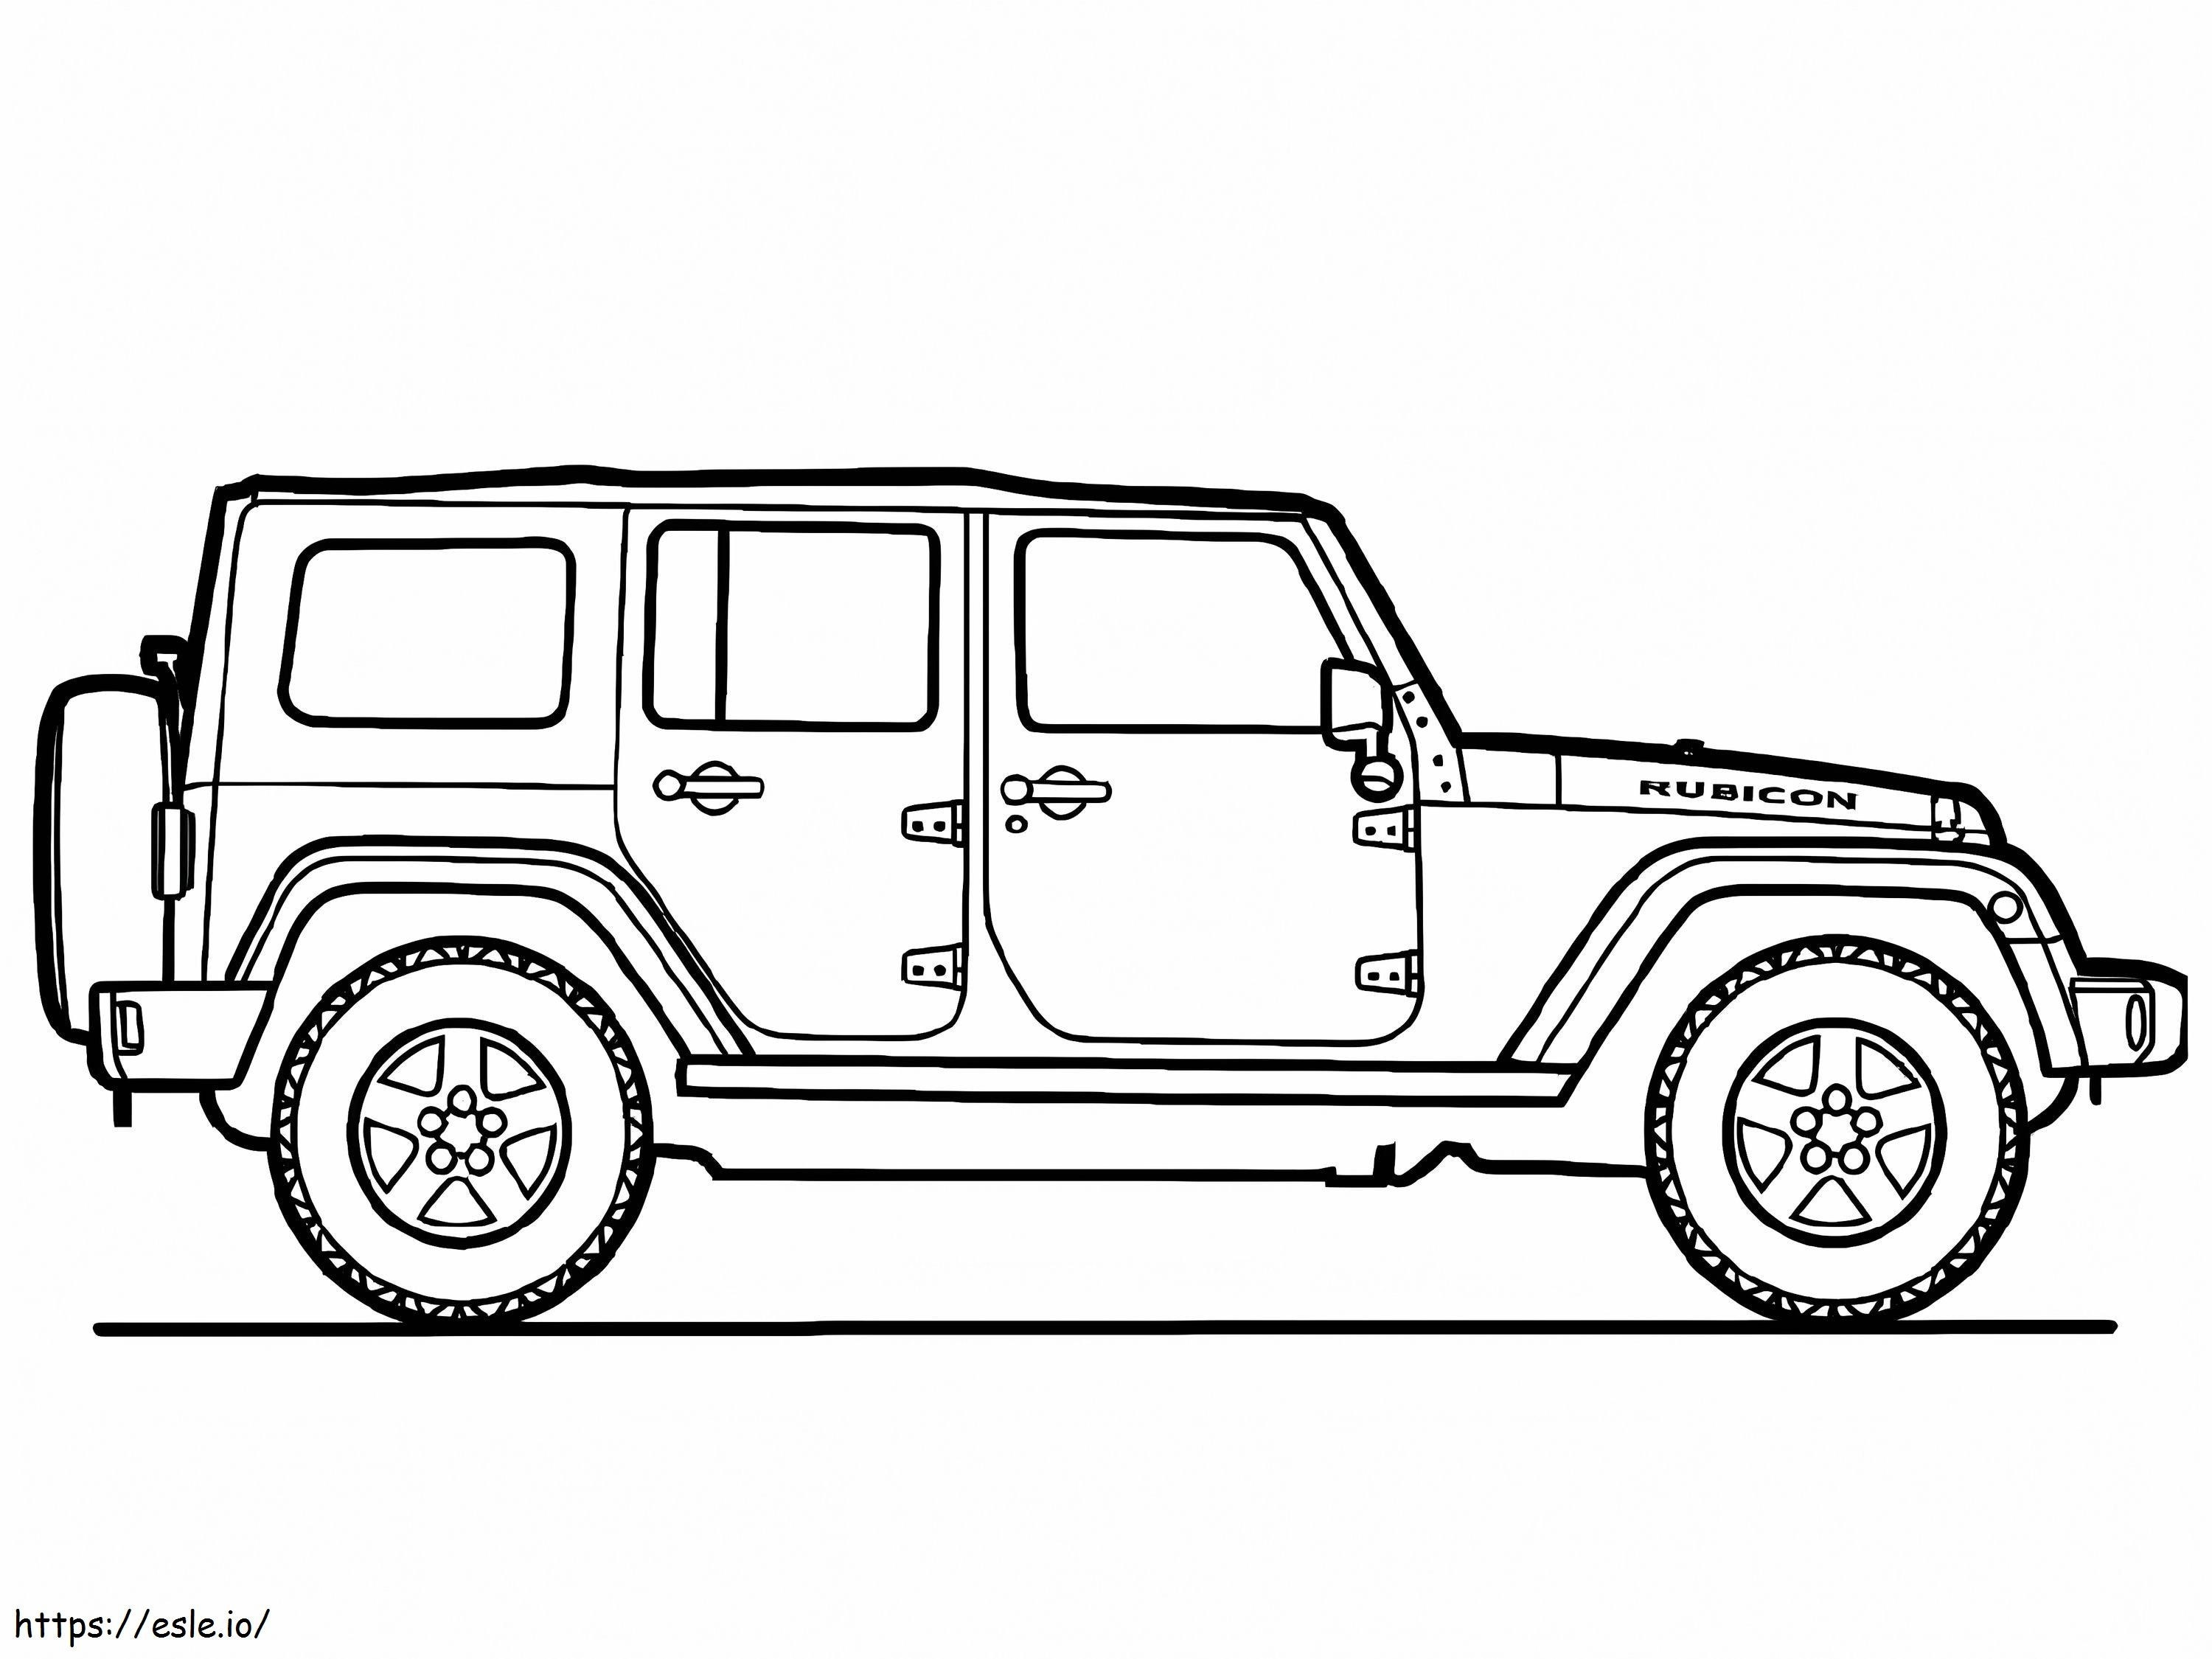 Jeep Rubicon coloring page